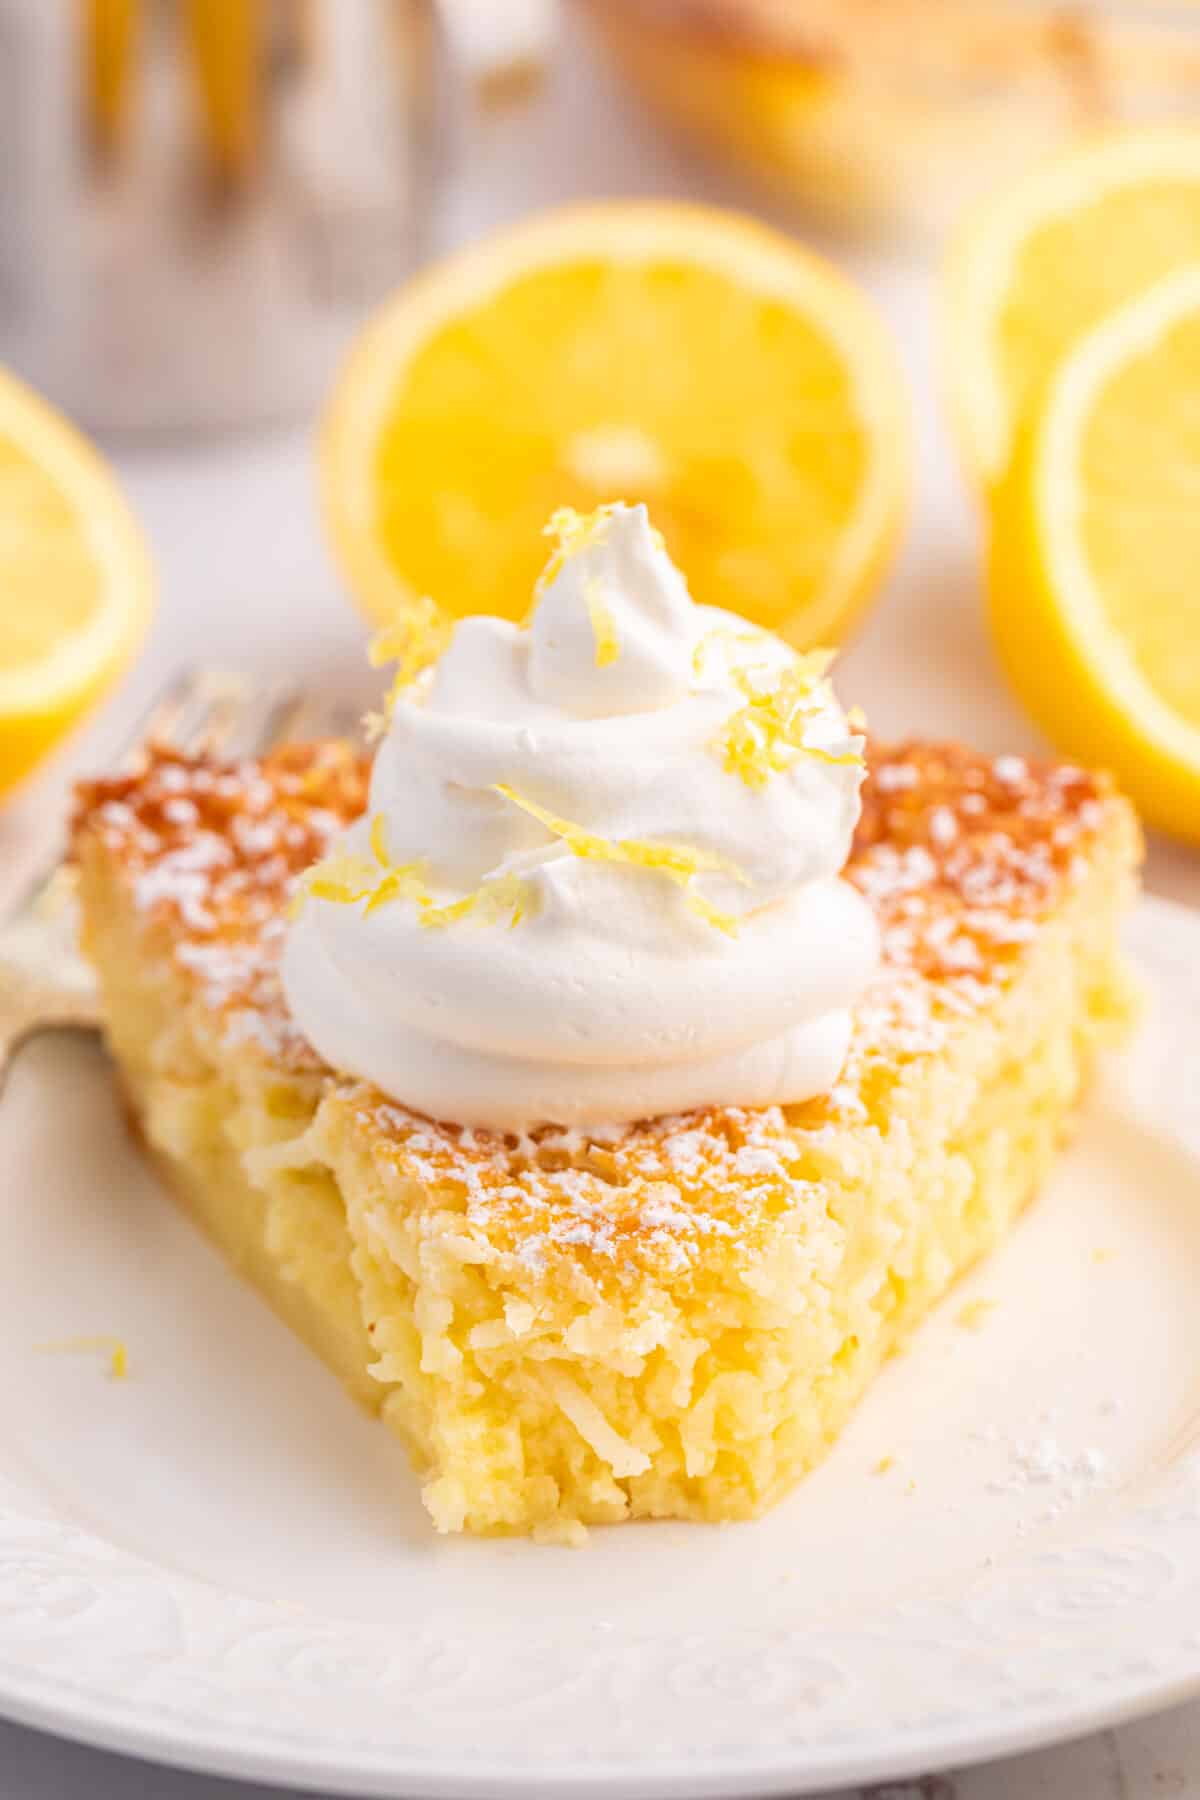 A slice of lemon impossible pie on a plate.